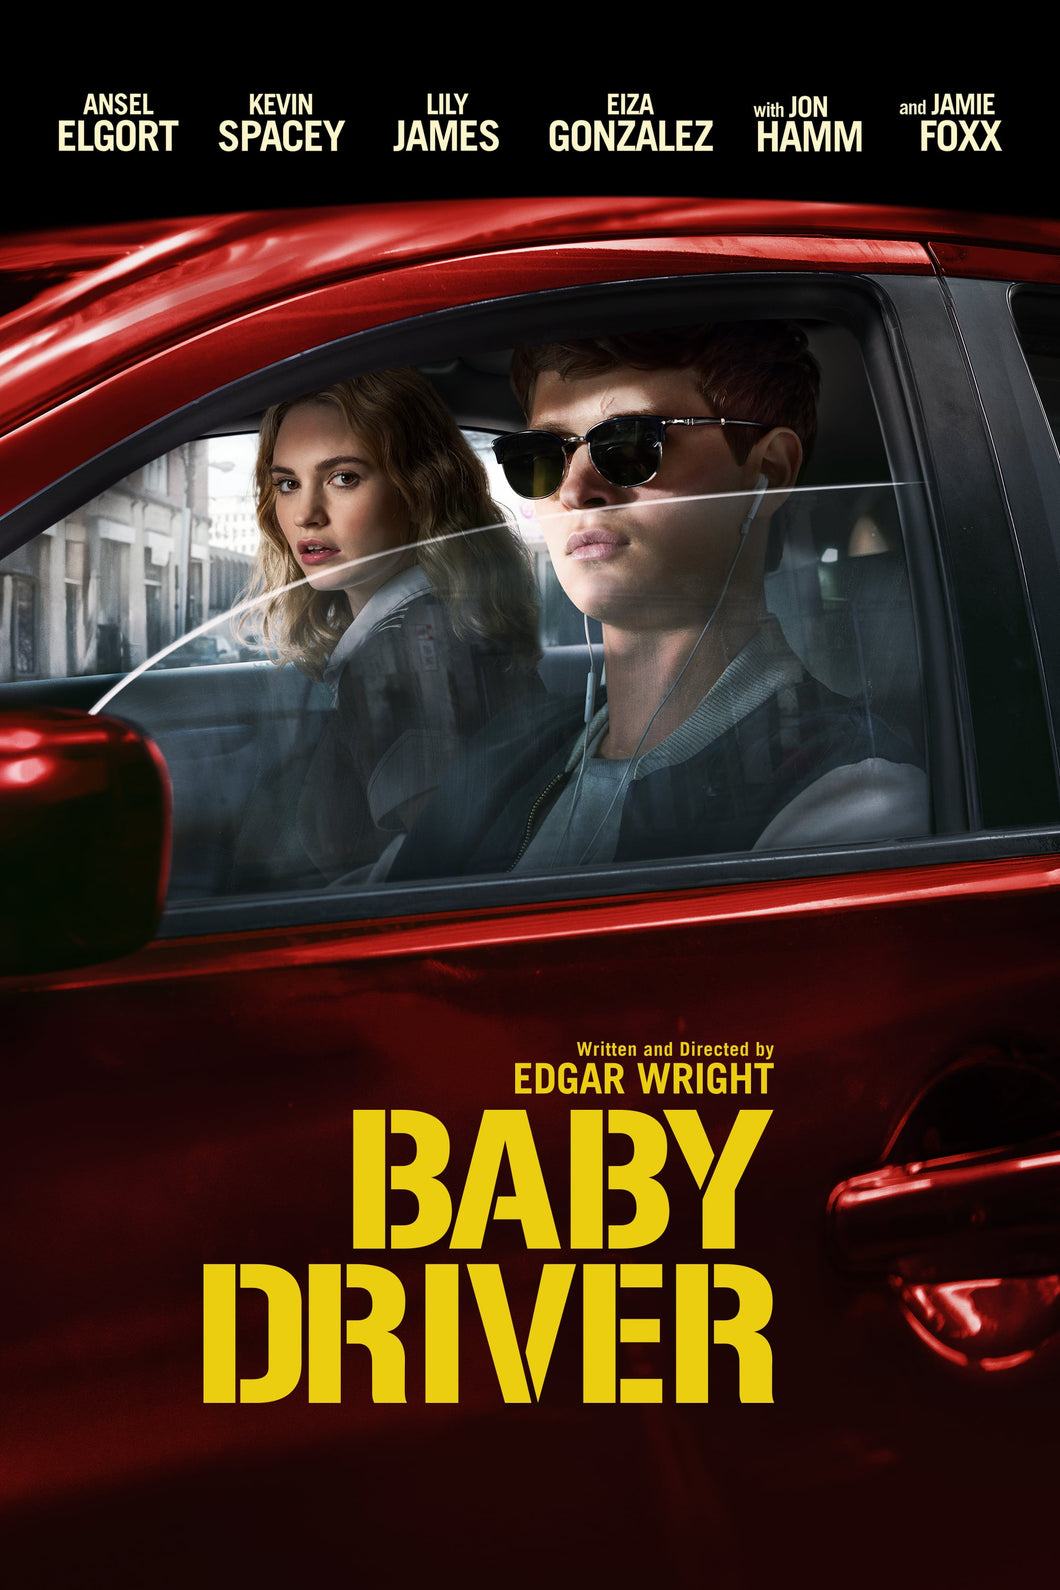 Baby Driver (2017) v3 Movie Poster High Quality Glossy Paper A1 A2 A3 A4 A3 Framed or Unframed!!!